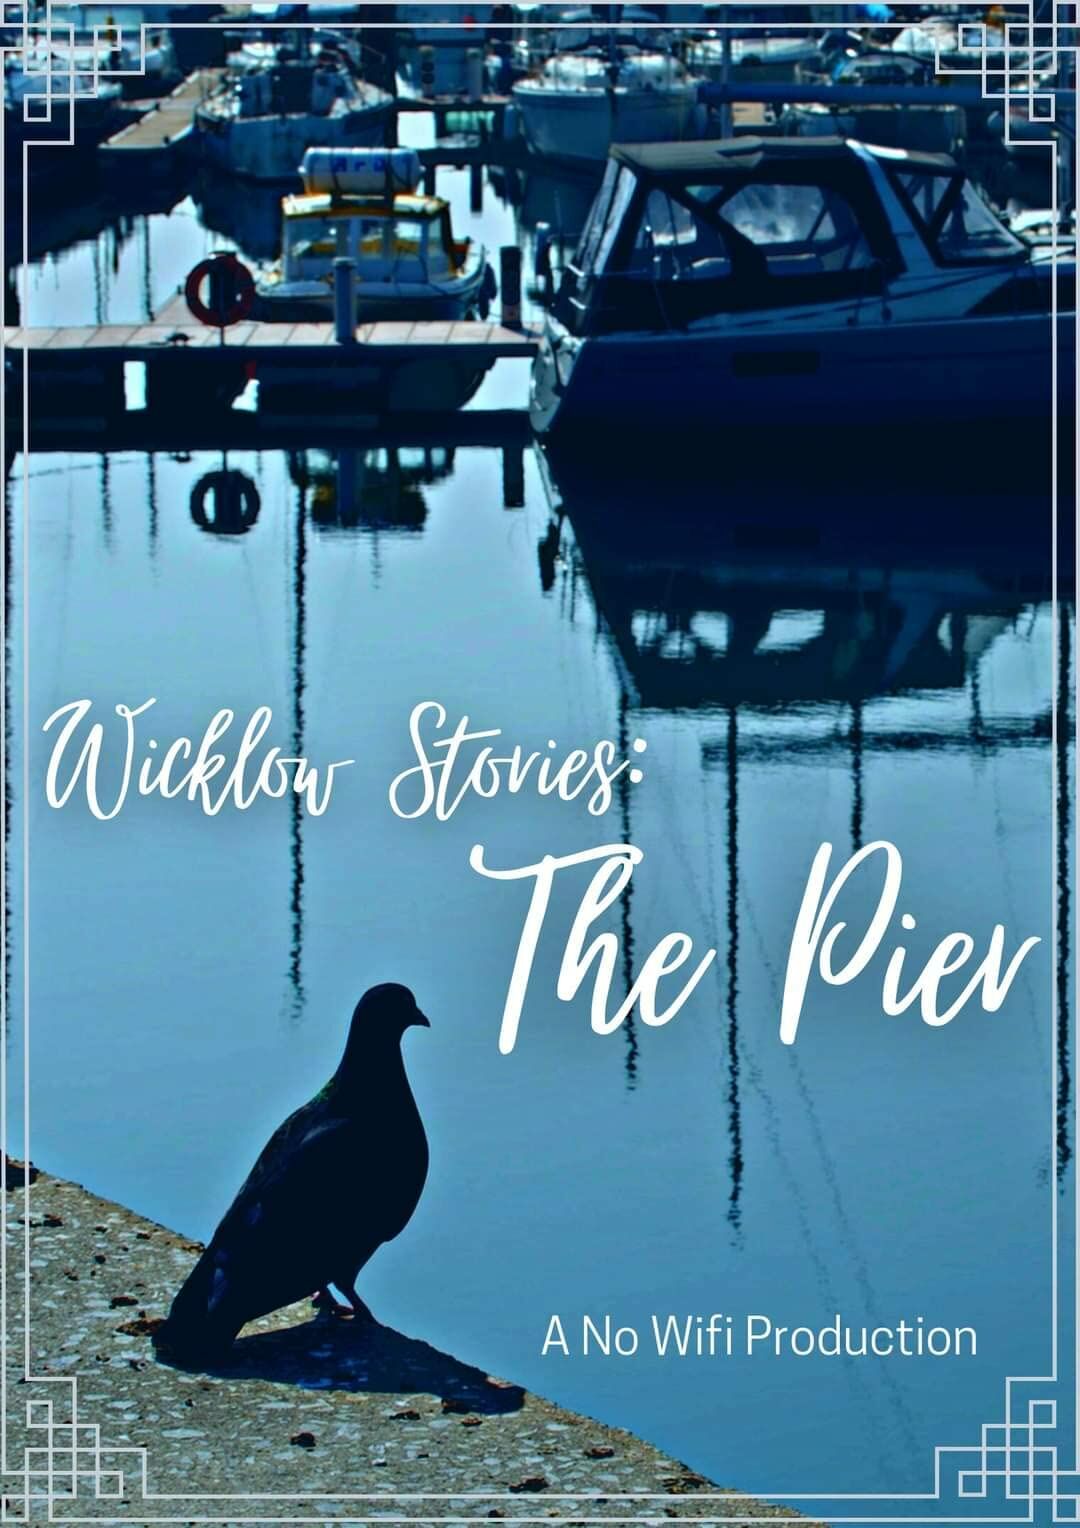 Wicklow Stories: The Pier